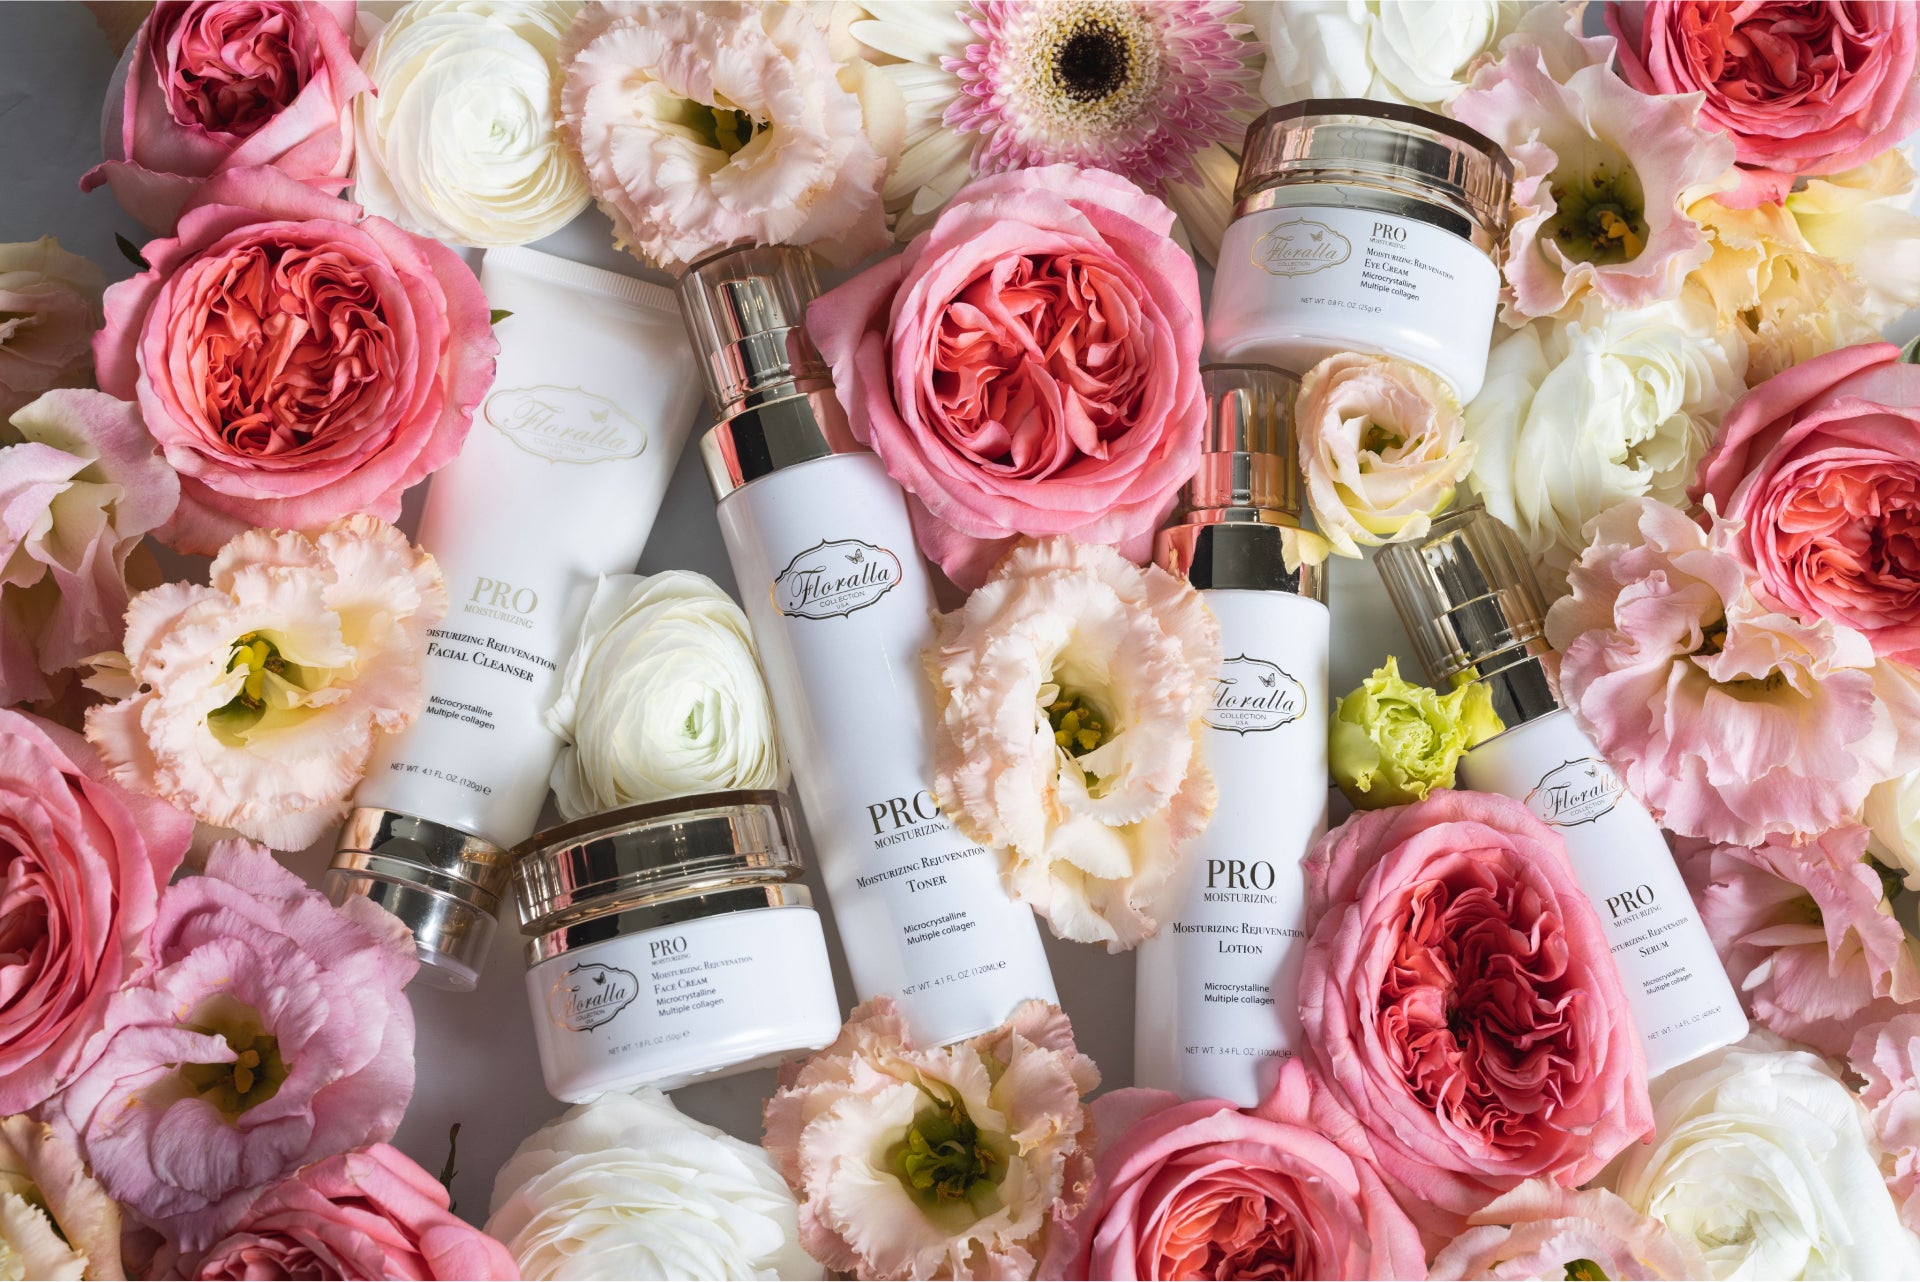 Floralla's collection of skincare products